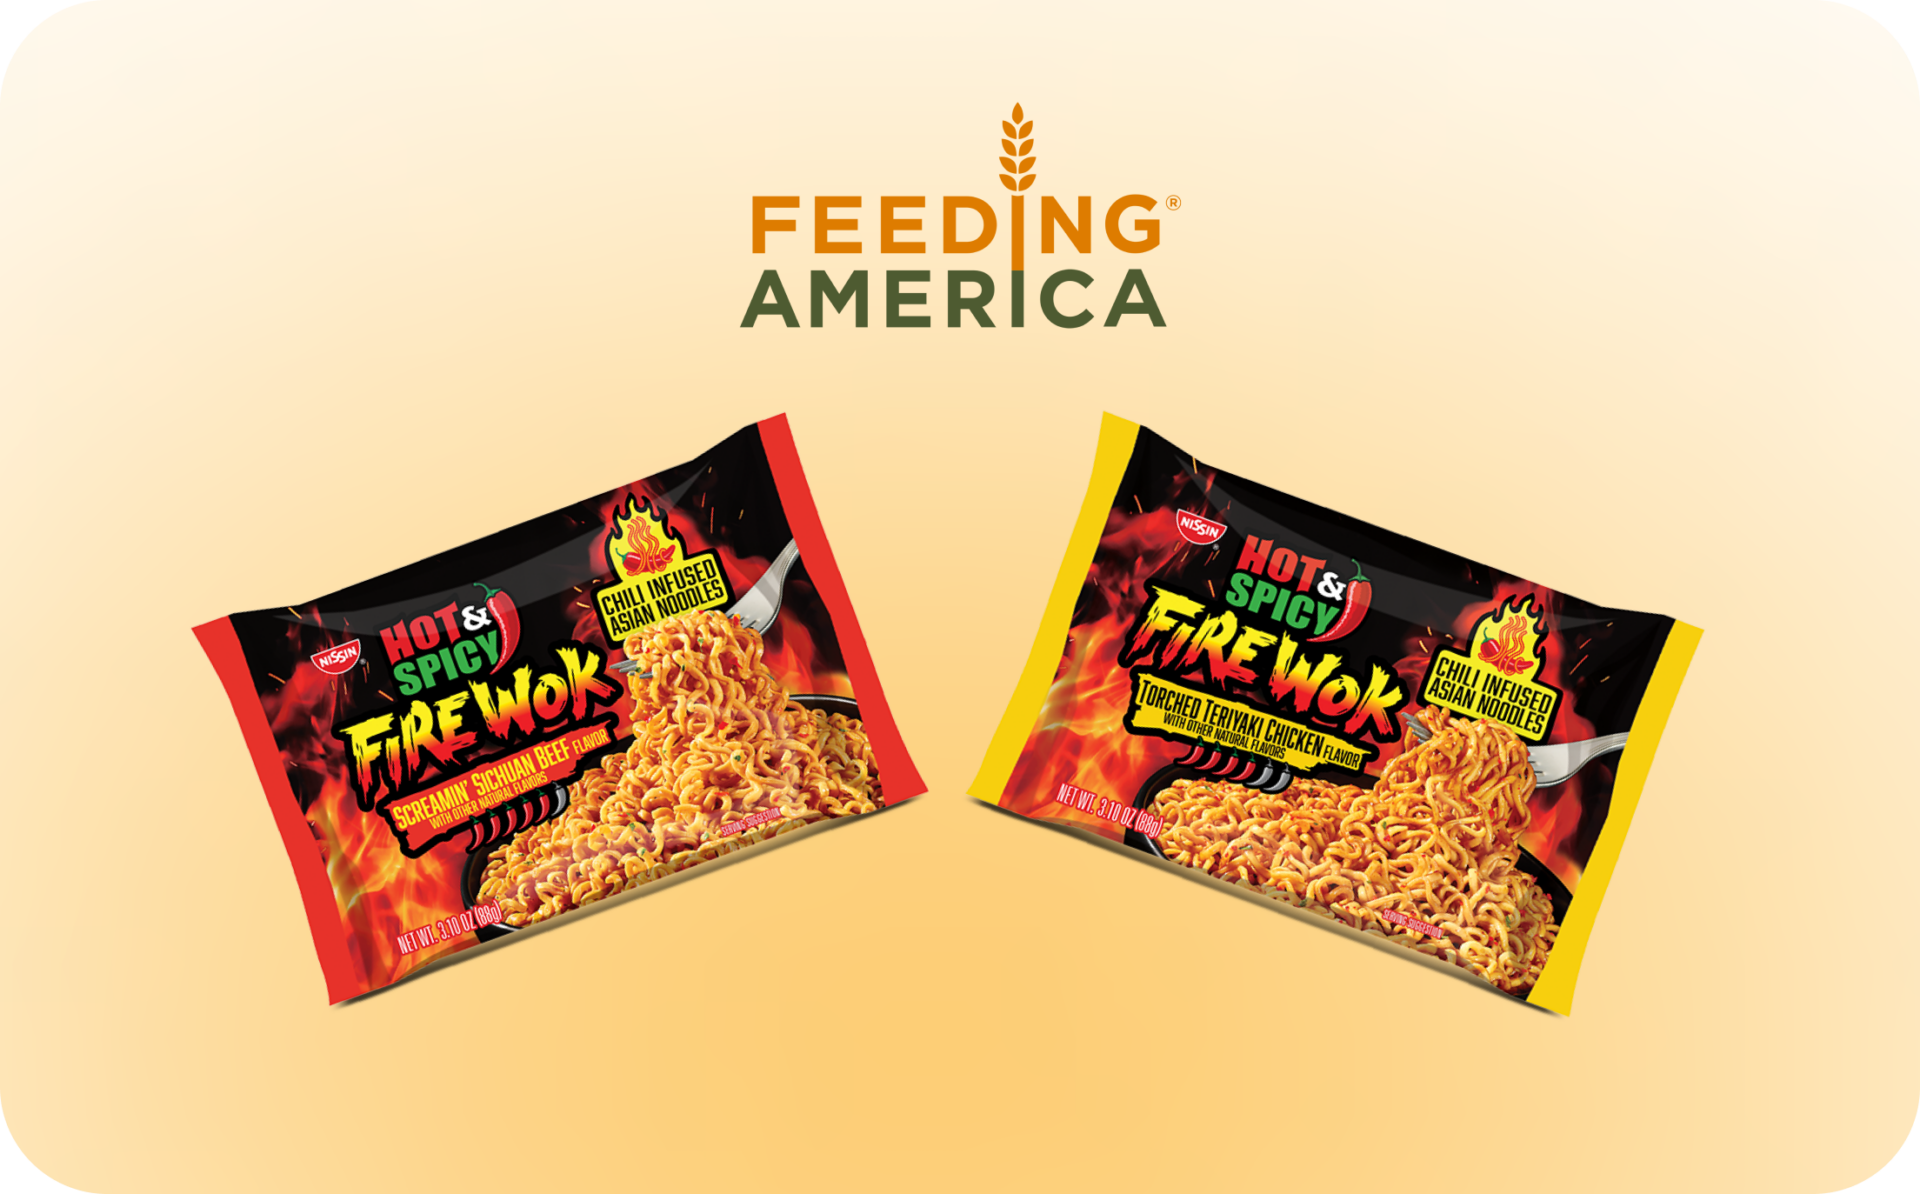 HOT & SPICY FIRE WOK LAUNCHES NEW LINE OF CHILI-INFUSED NOODLES FOR BOLDER, FLAVOR-FORWARD RAMEN RECIPES